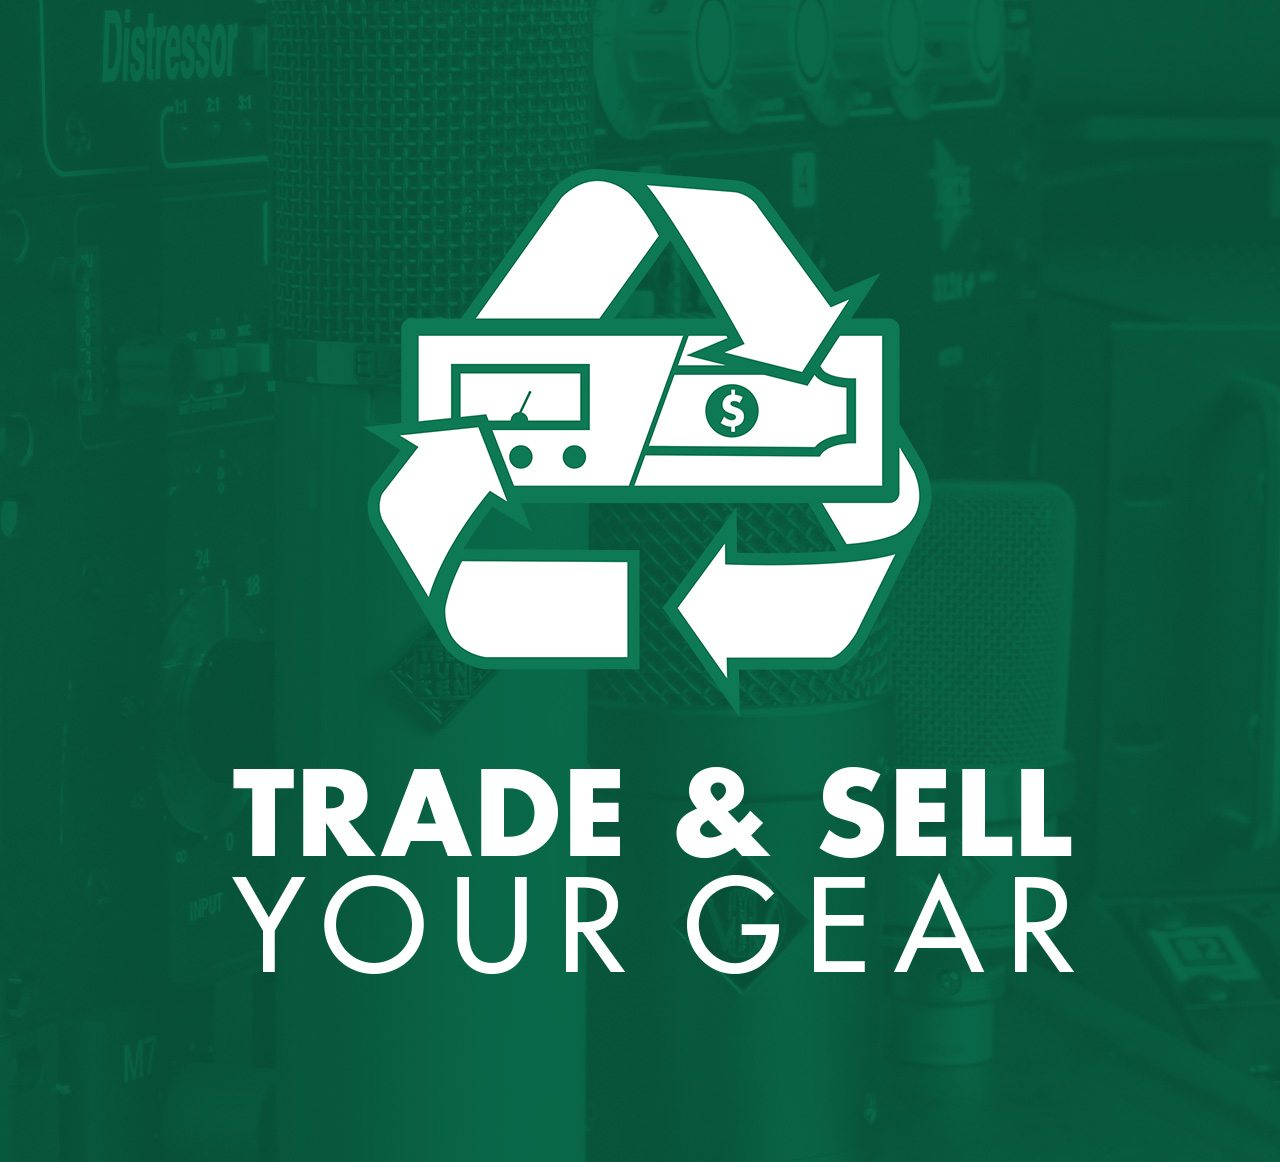 Trade & Sell Your Gear